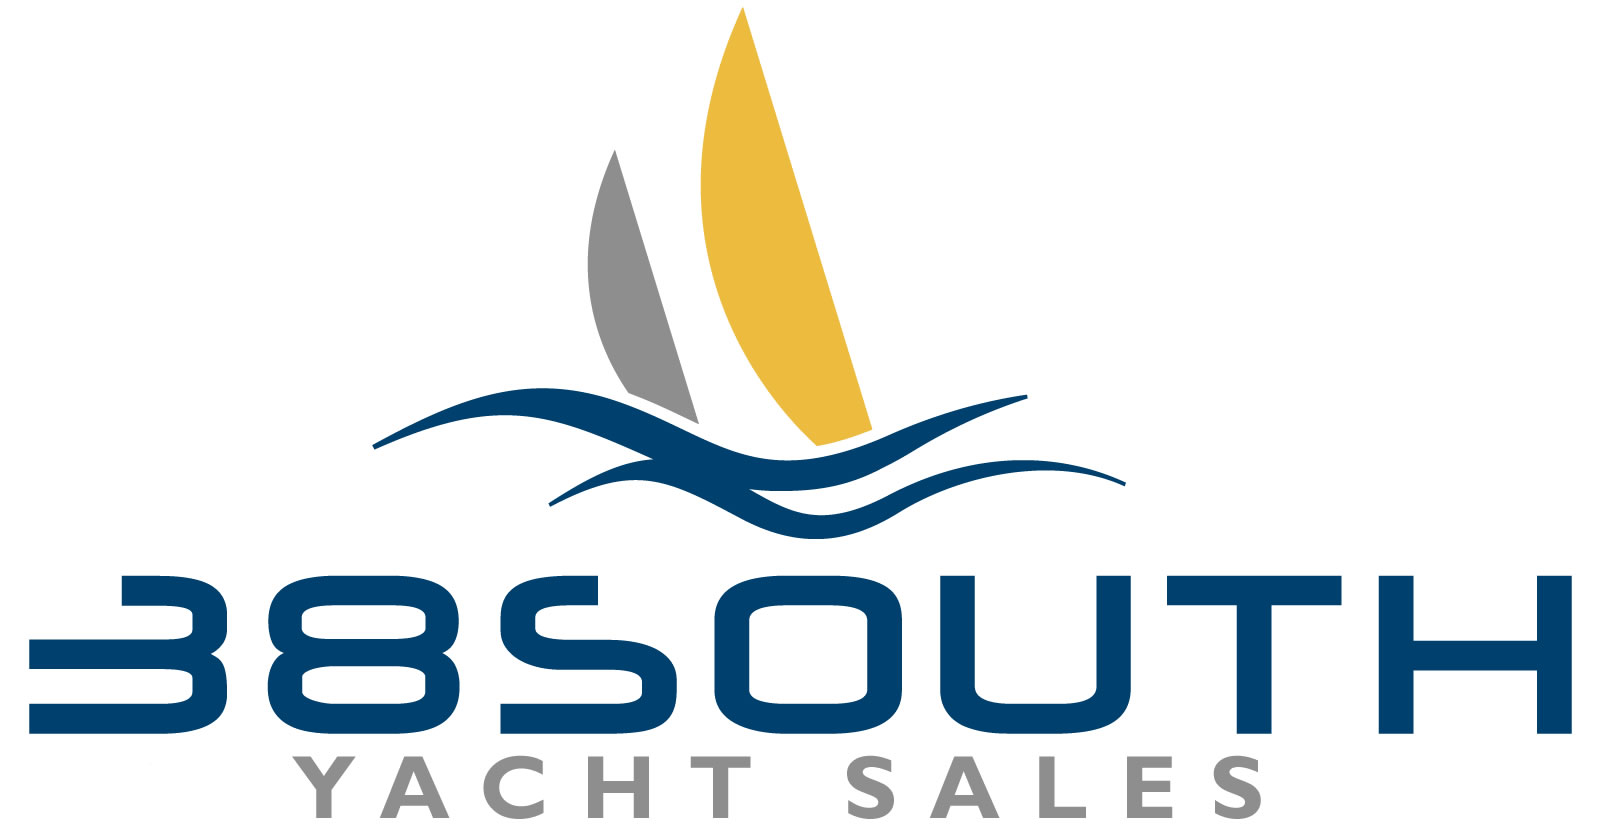 38 south yacht sales logo (2022 high res)